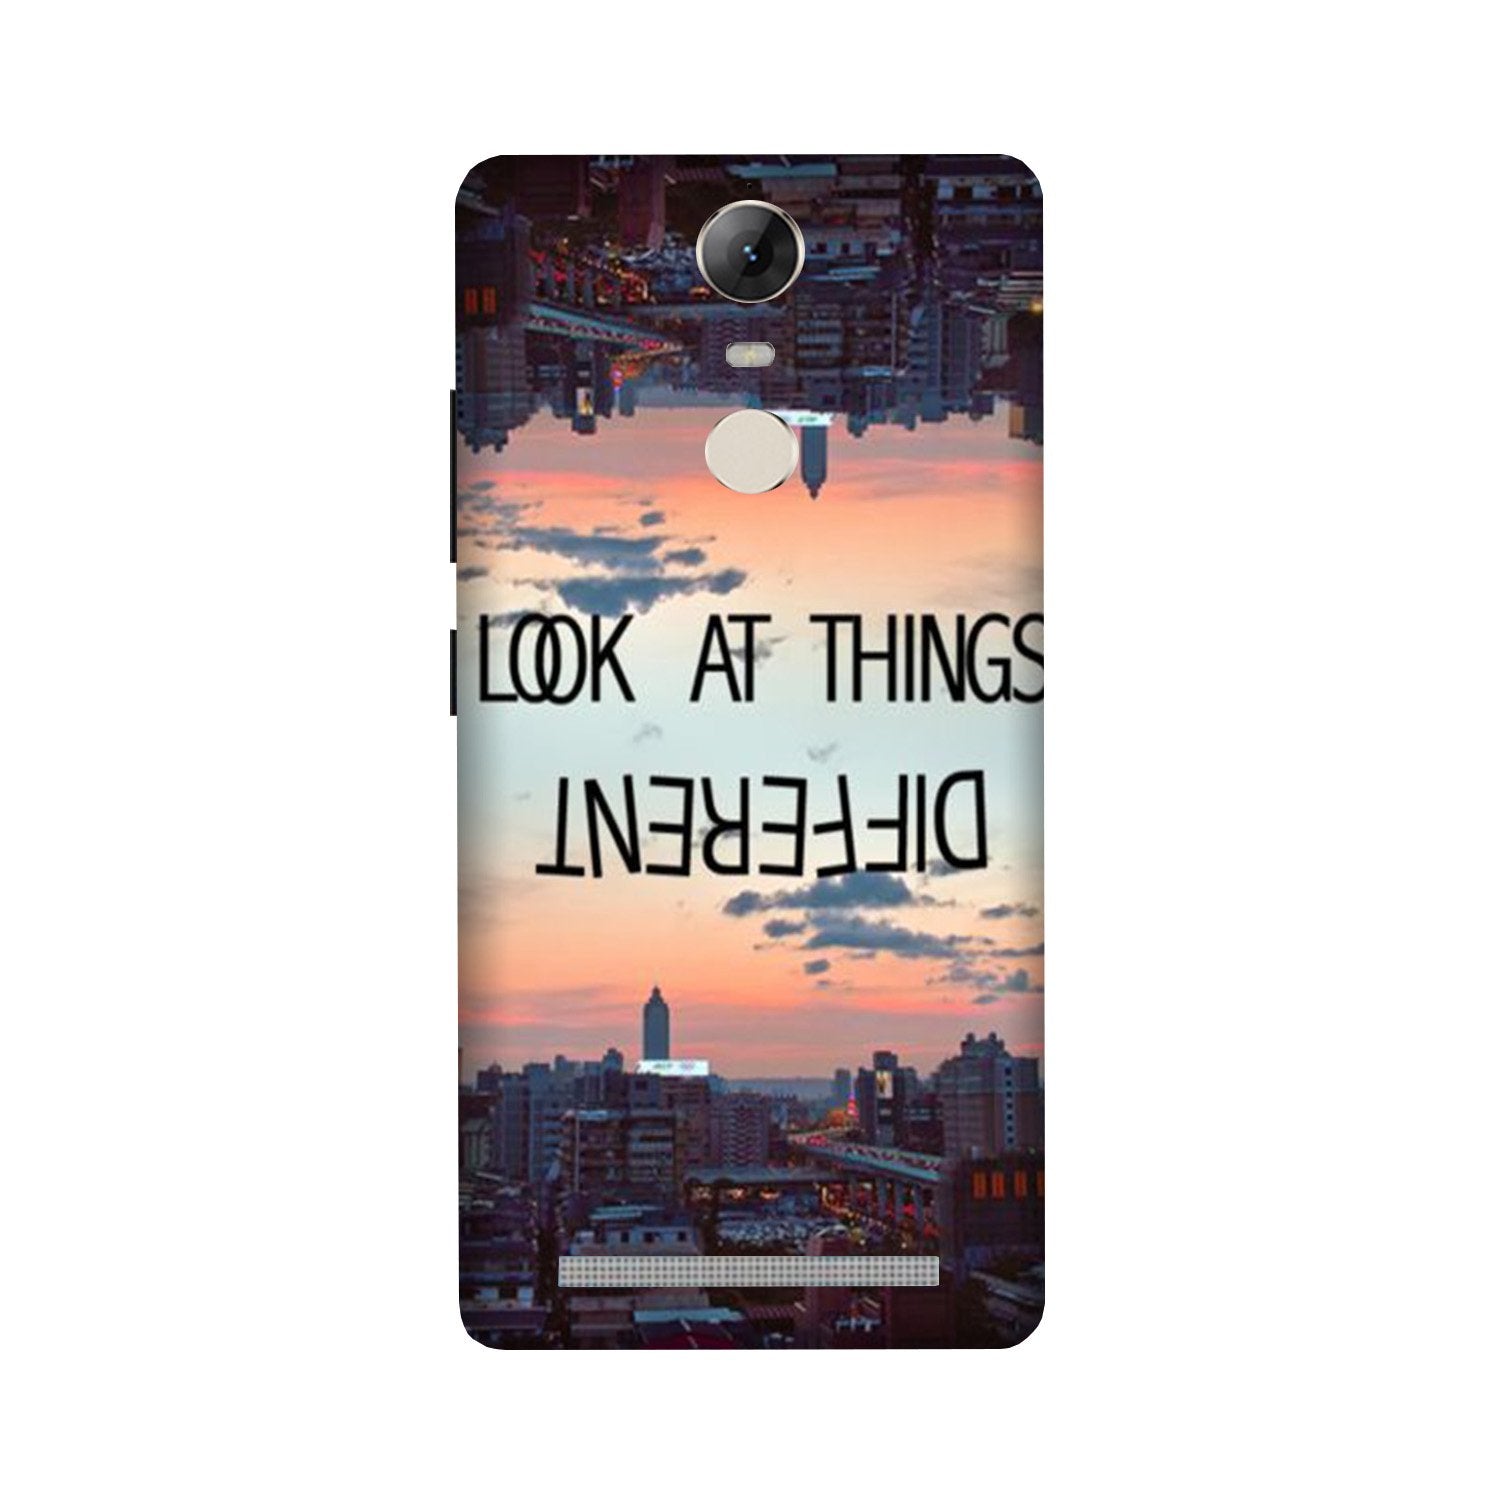 Look at things different Case for Lenovo Vibe K5 Note